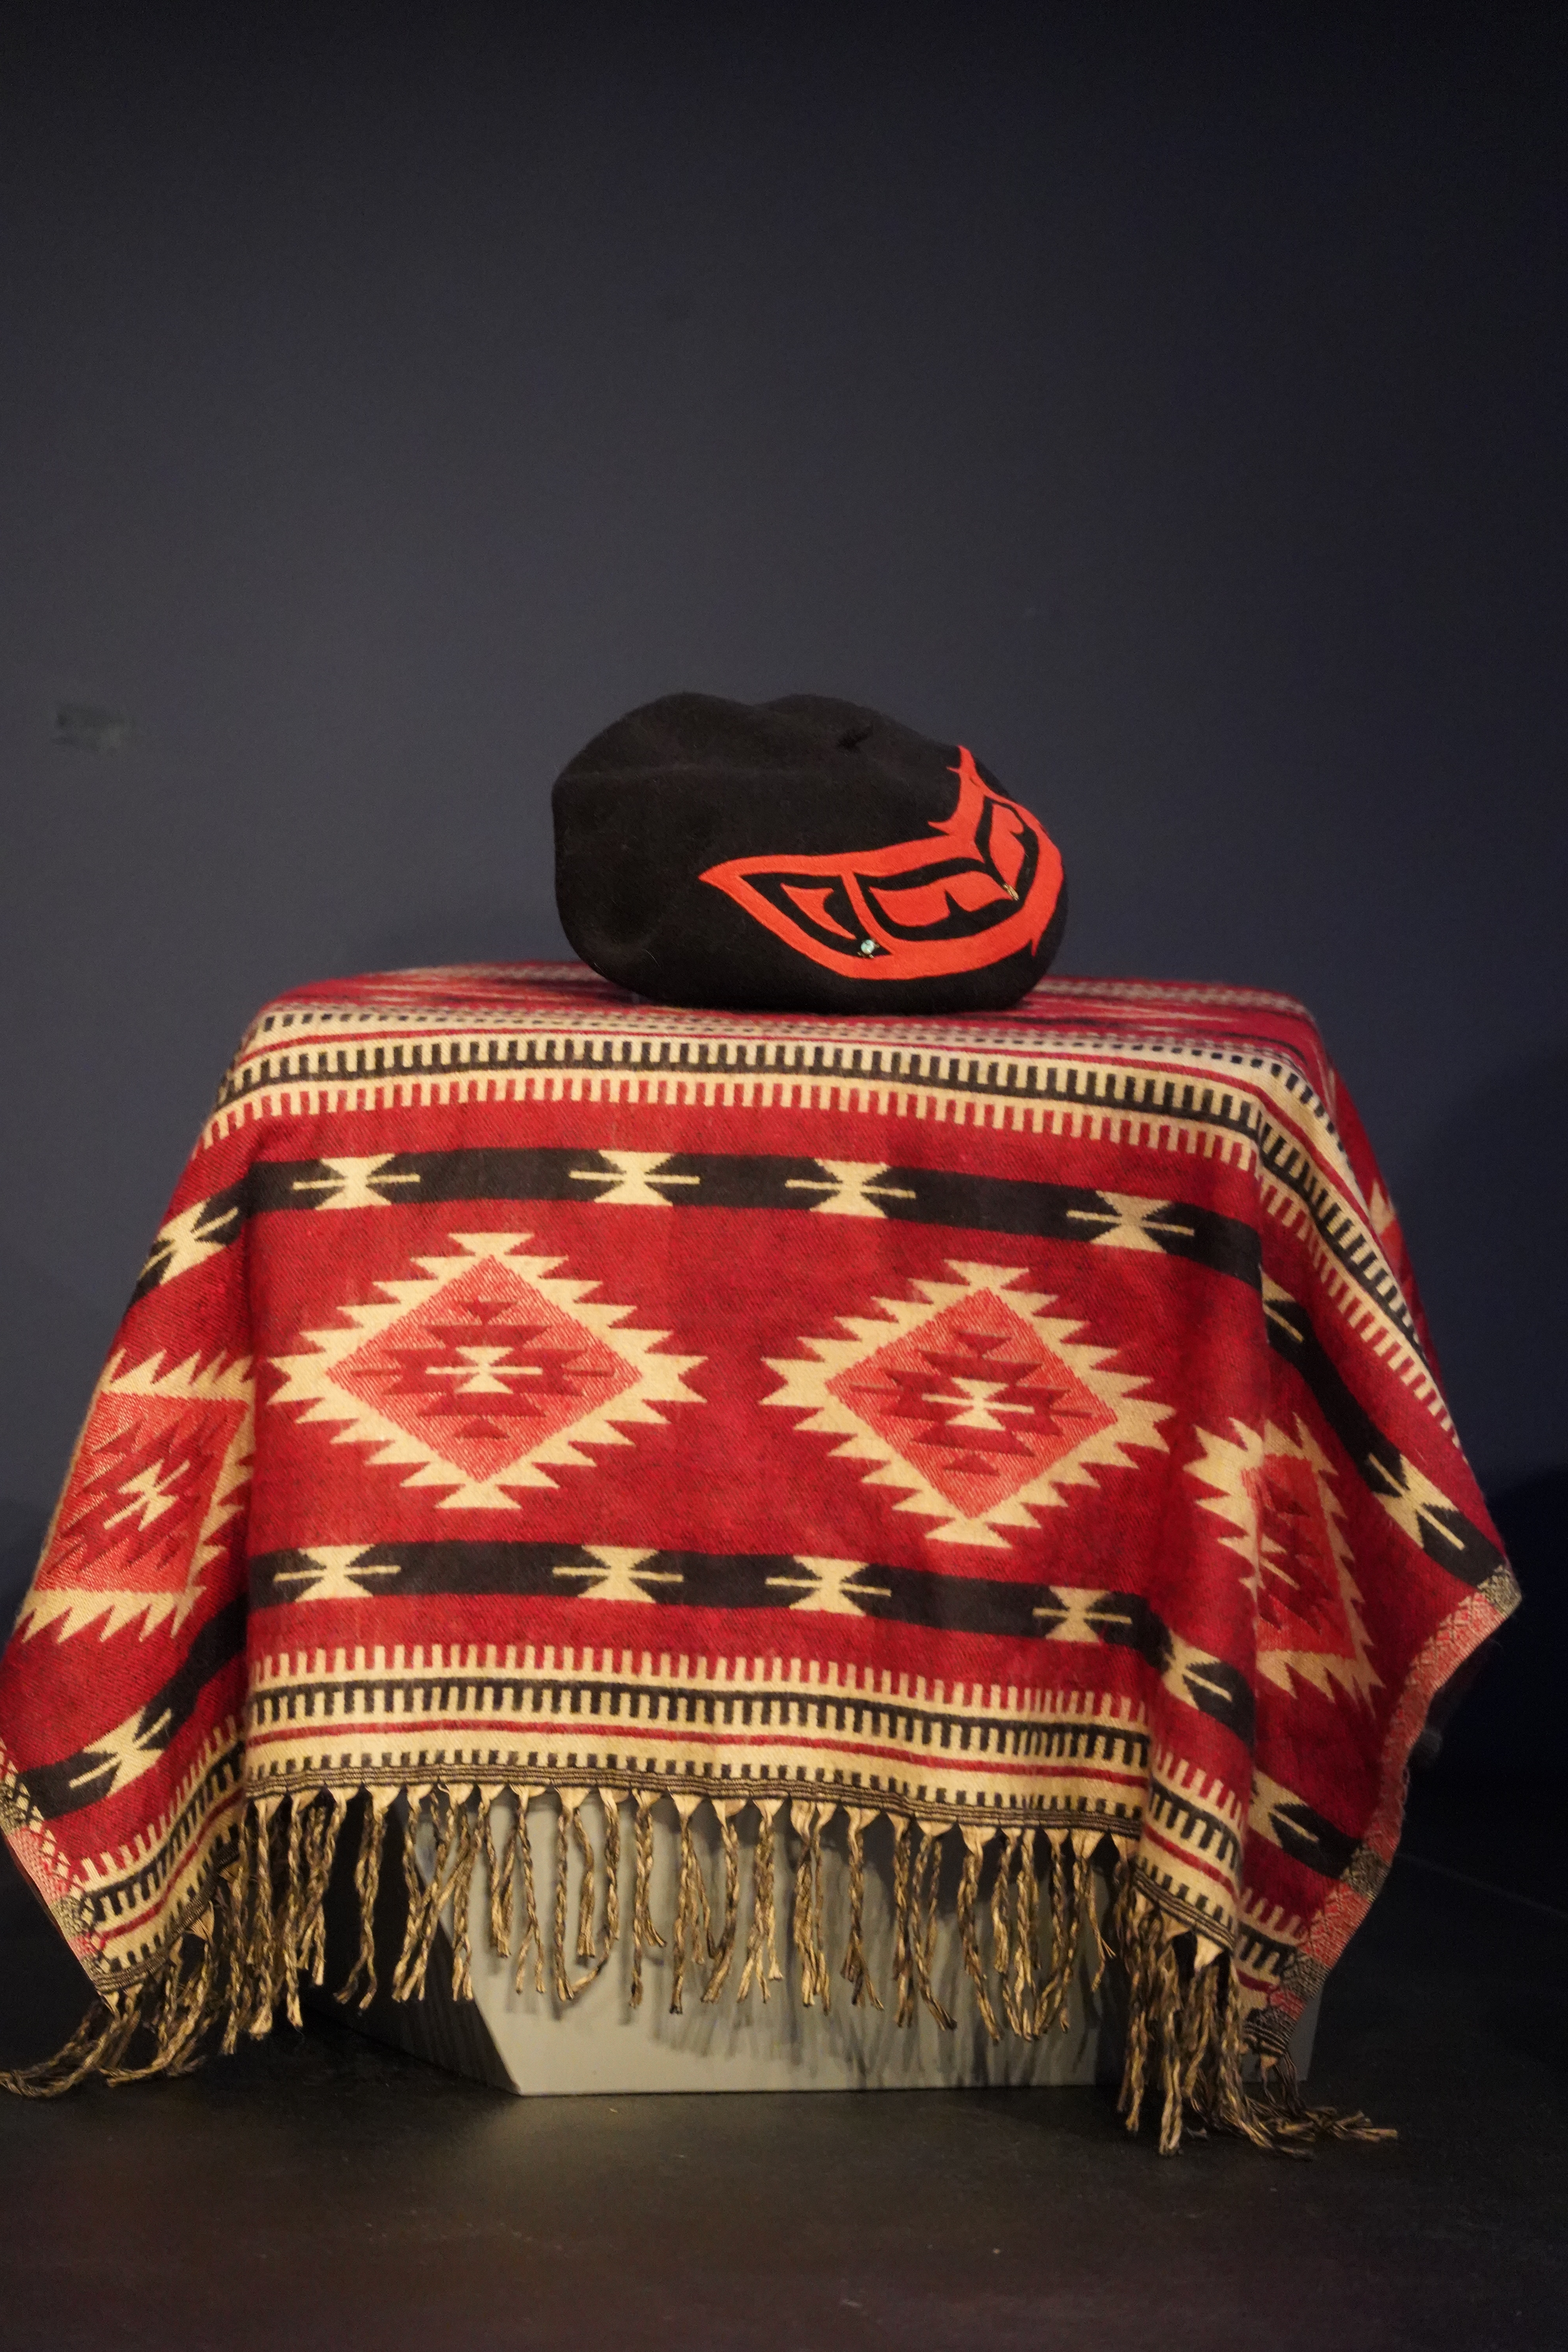 A black beret with a red design sits atop a red blanket with black and cream designs and patterns.